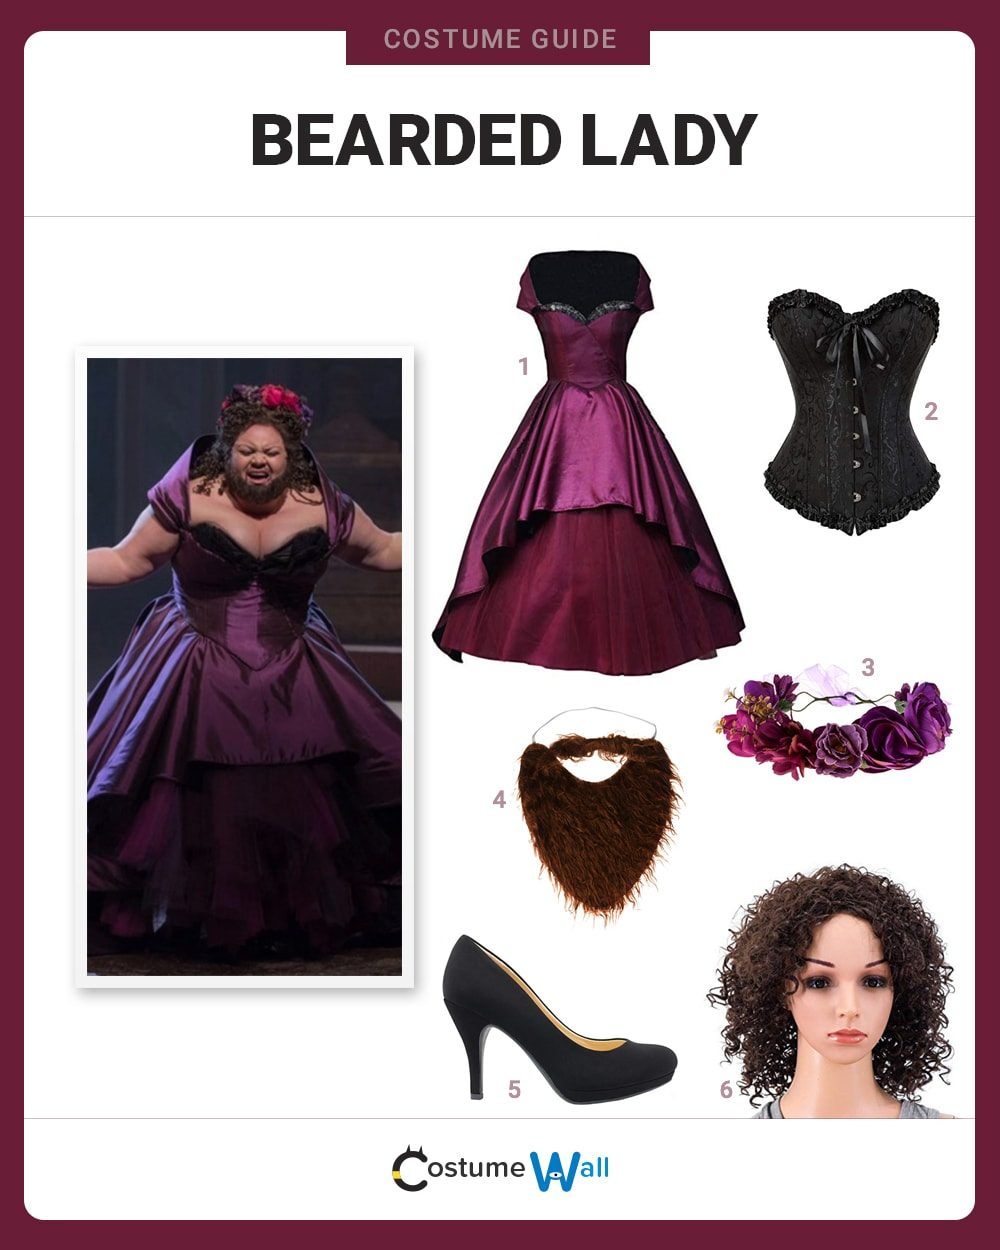 The Bearded Lady Costume Guide